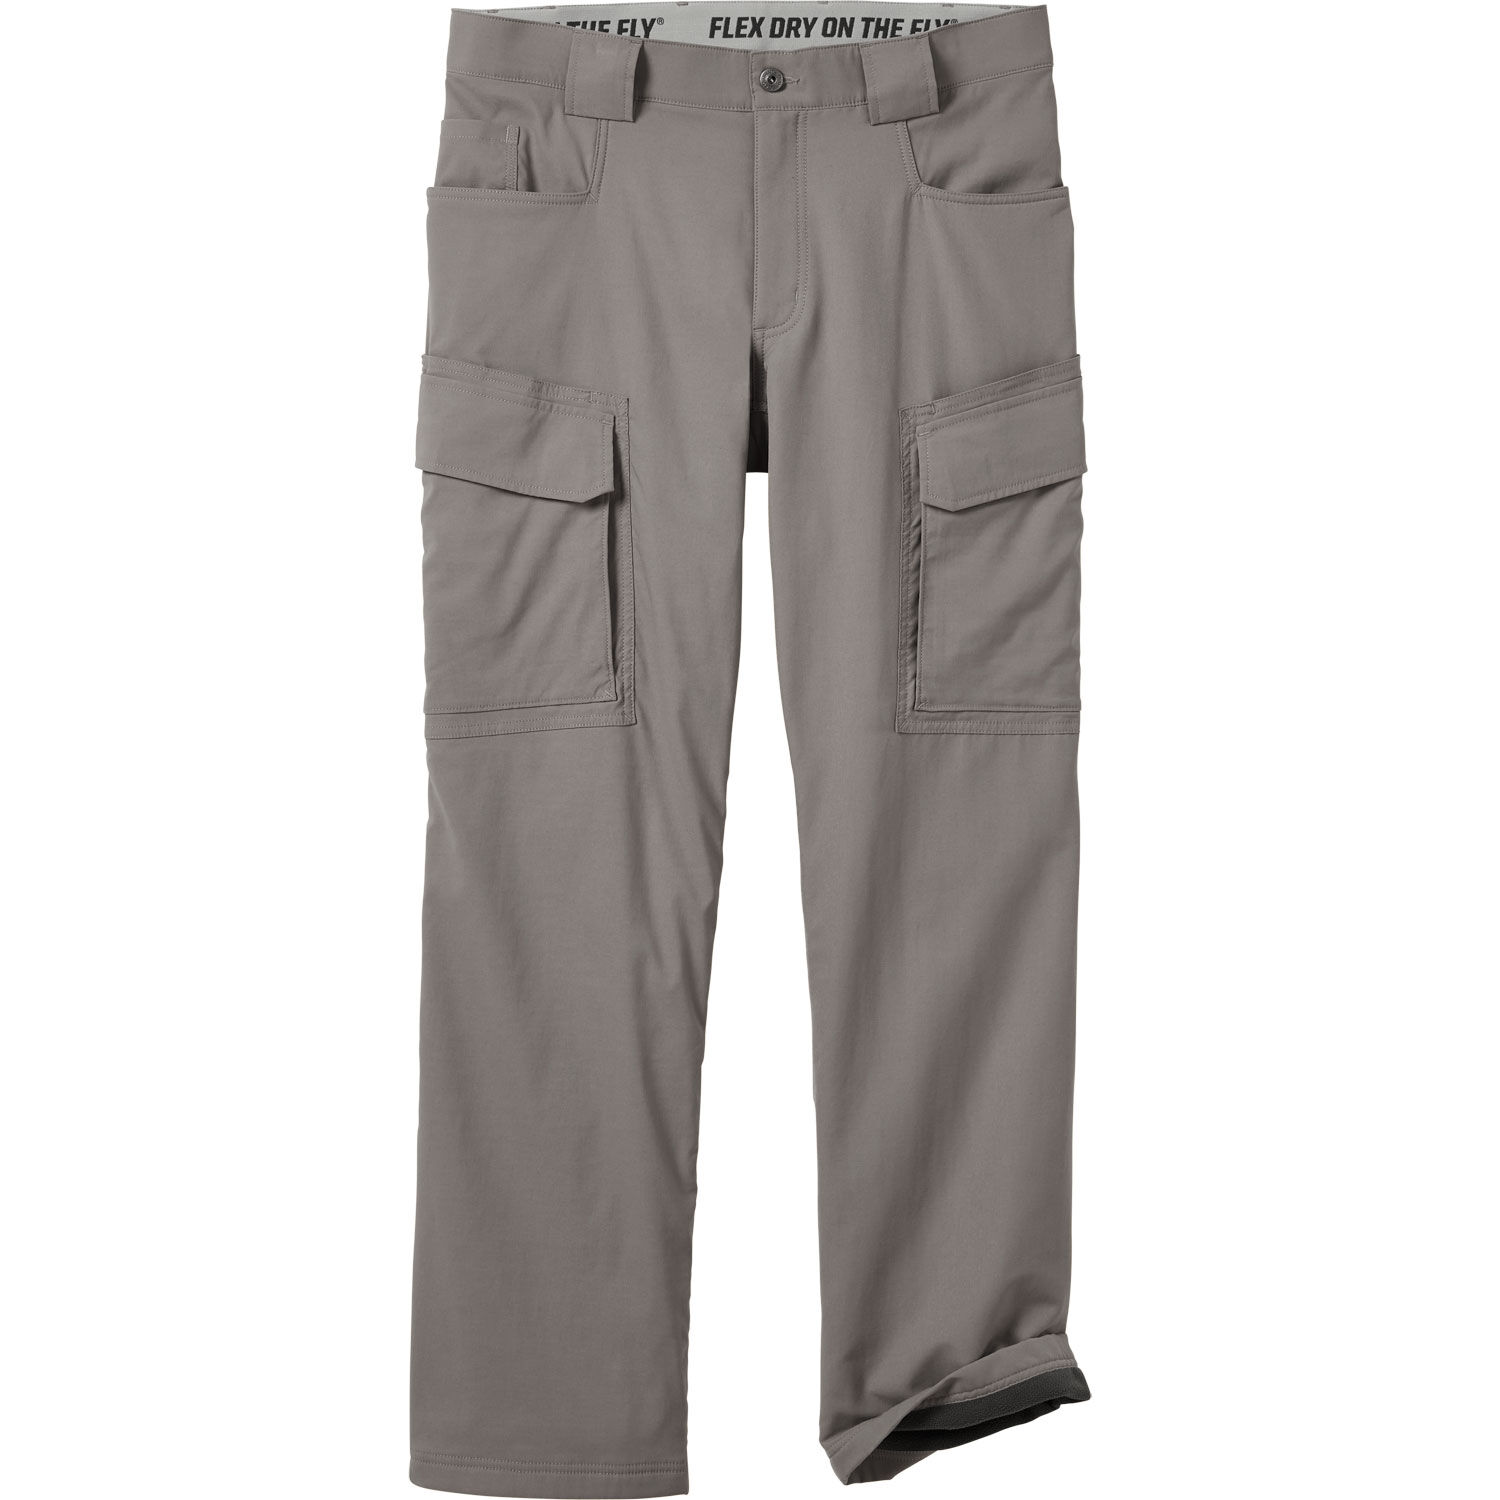 Mens DuluthFlex Dry on the Fly FleeceLined Cargo Pants  Duluth Trading  Company